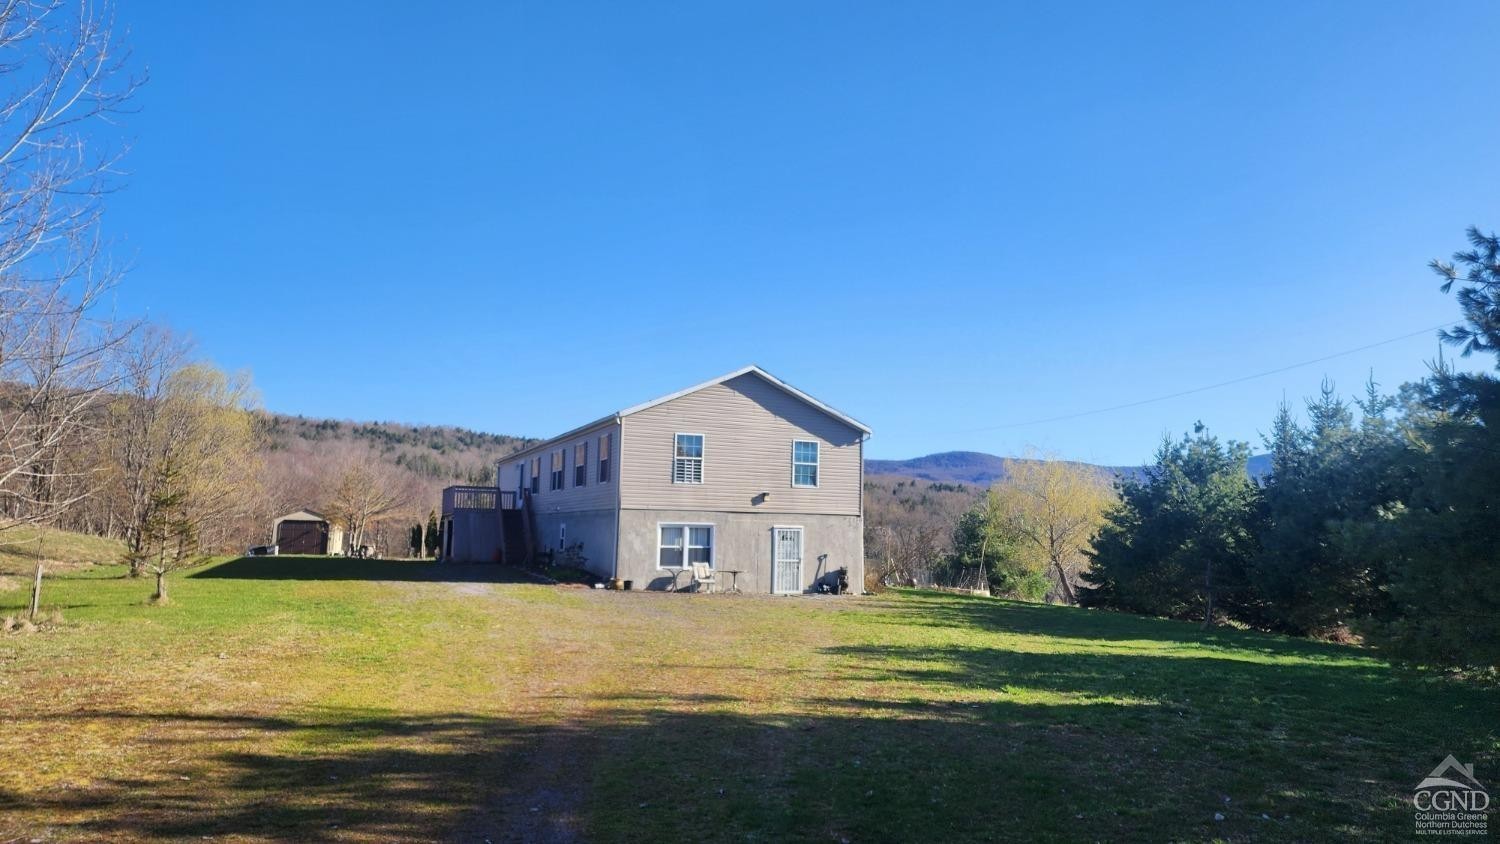 1. 936 N. Potter Mountain Road